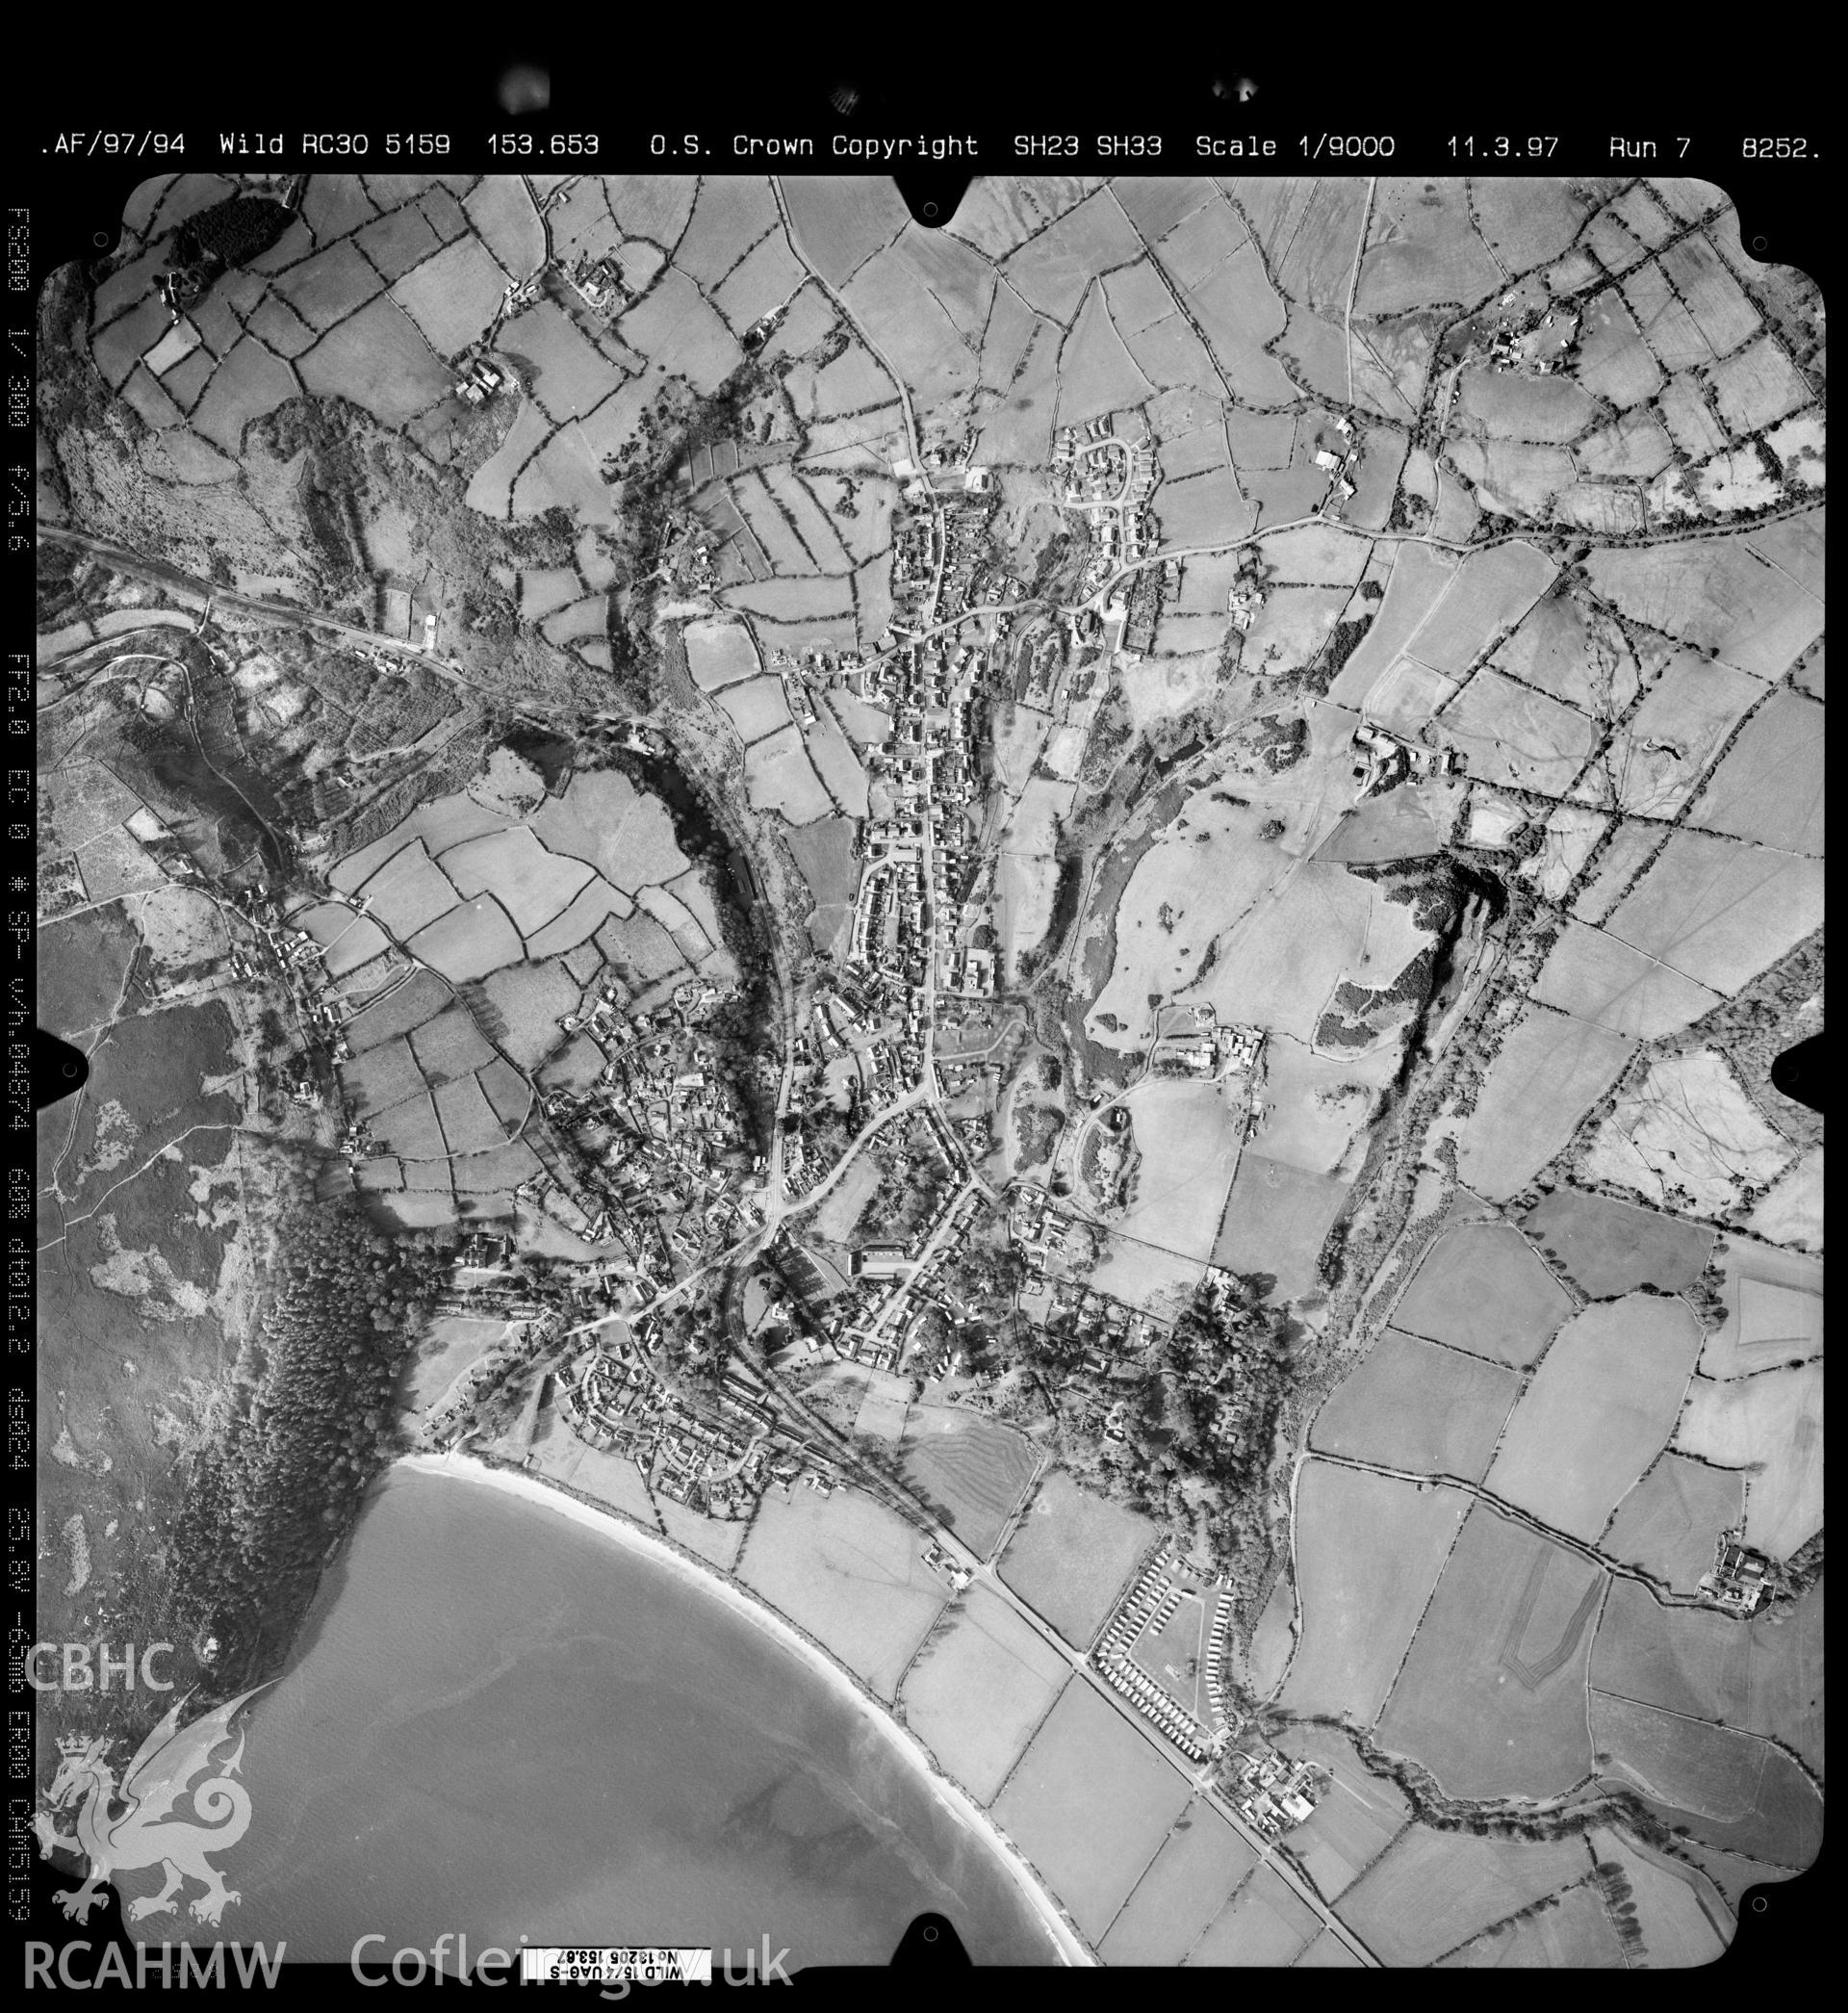 Digitized copy of an aerial photograph showing the Llanengan area, taken by Ordnance Survey, 1997.